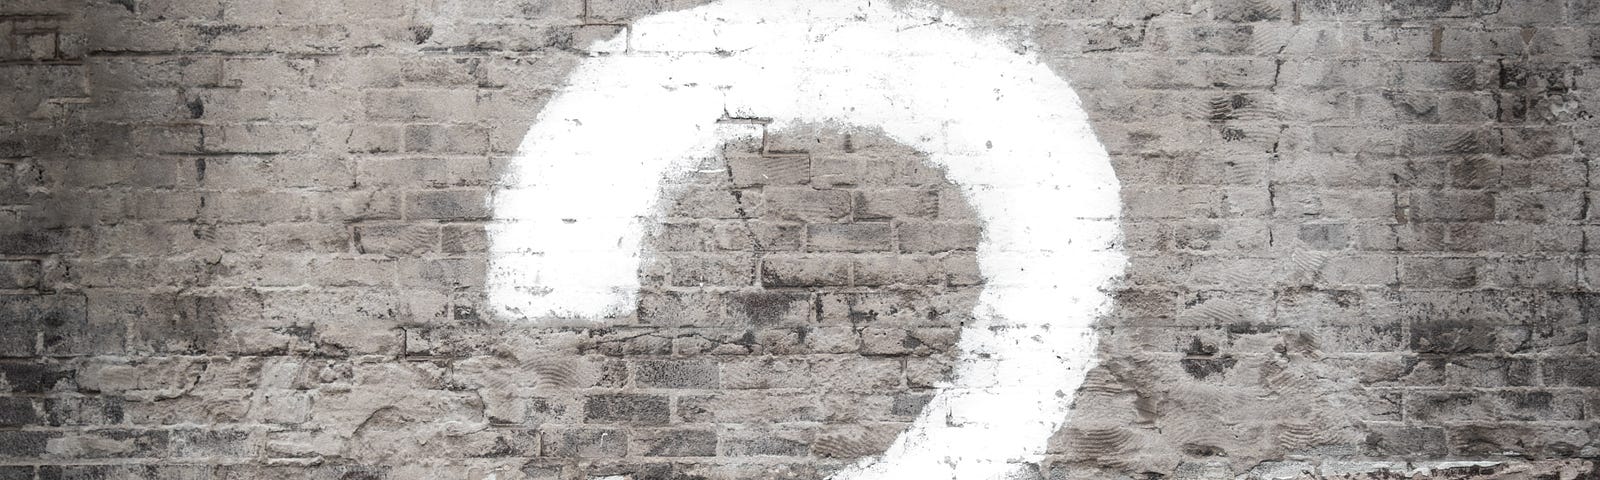 A large white question mark sprayed on a faded brick wall